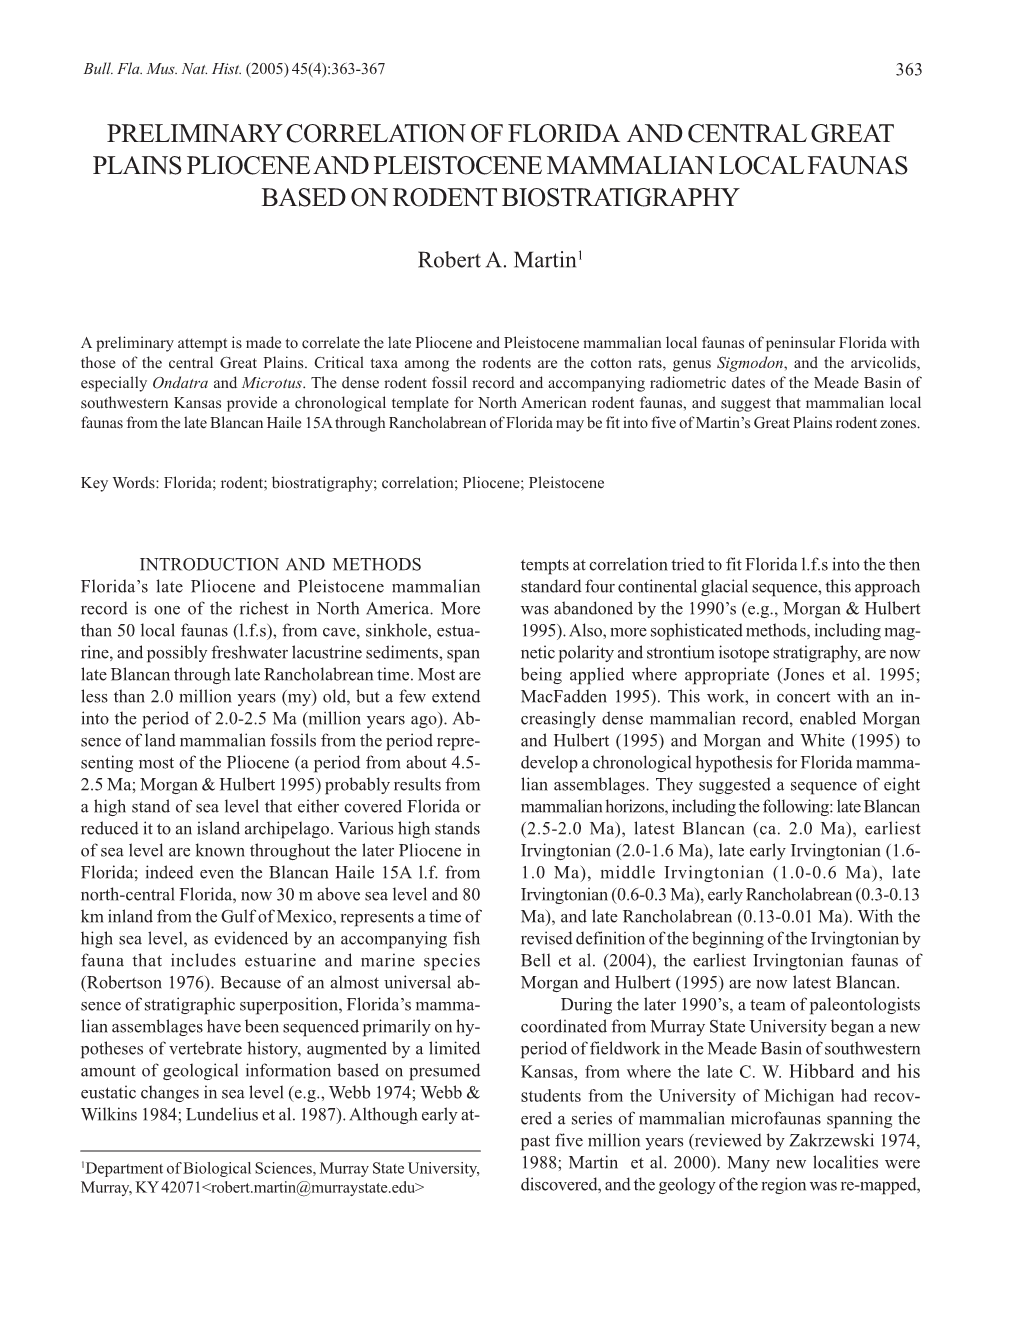 Preliminary Correlation of Florida and Central Great Plains Pliocene and Pleistocene Mammalian Local Faunas Based on Rodent Biostratigraphy